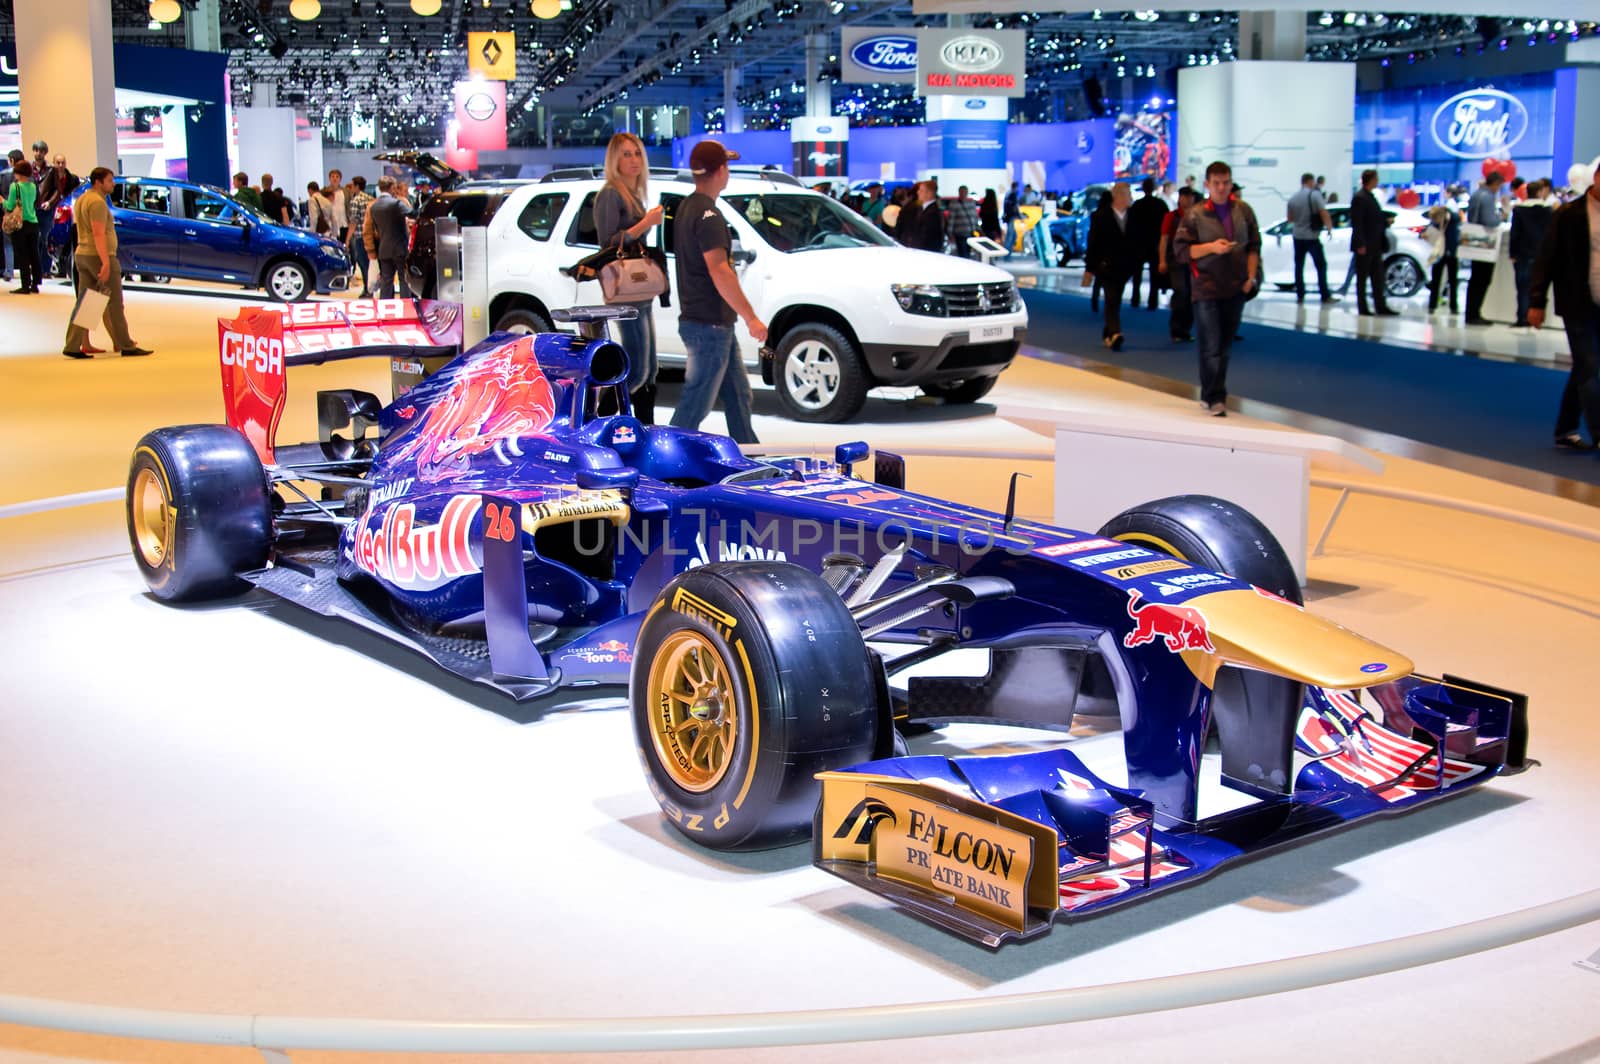 MOSCOW-SEPTEMBER 2: Toro Rosso STR9 at the Moscow International Automobile Salon on September 2, 2014 in Moscow, Russia